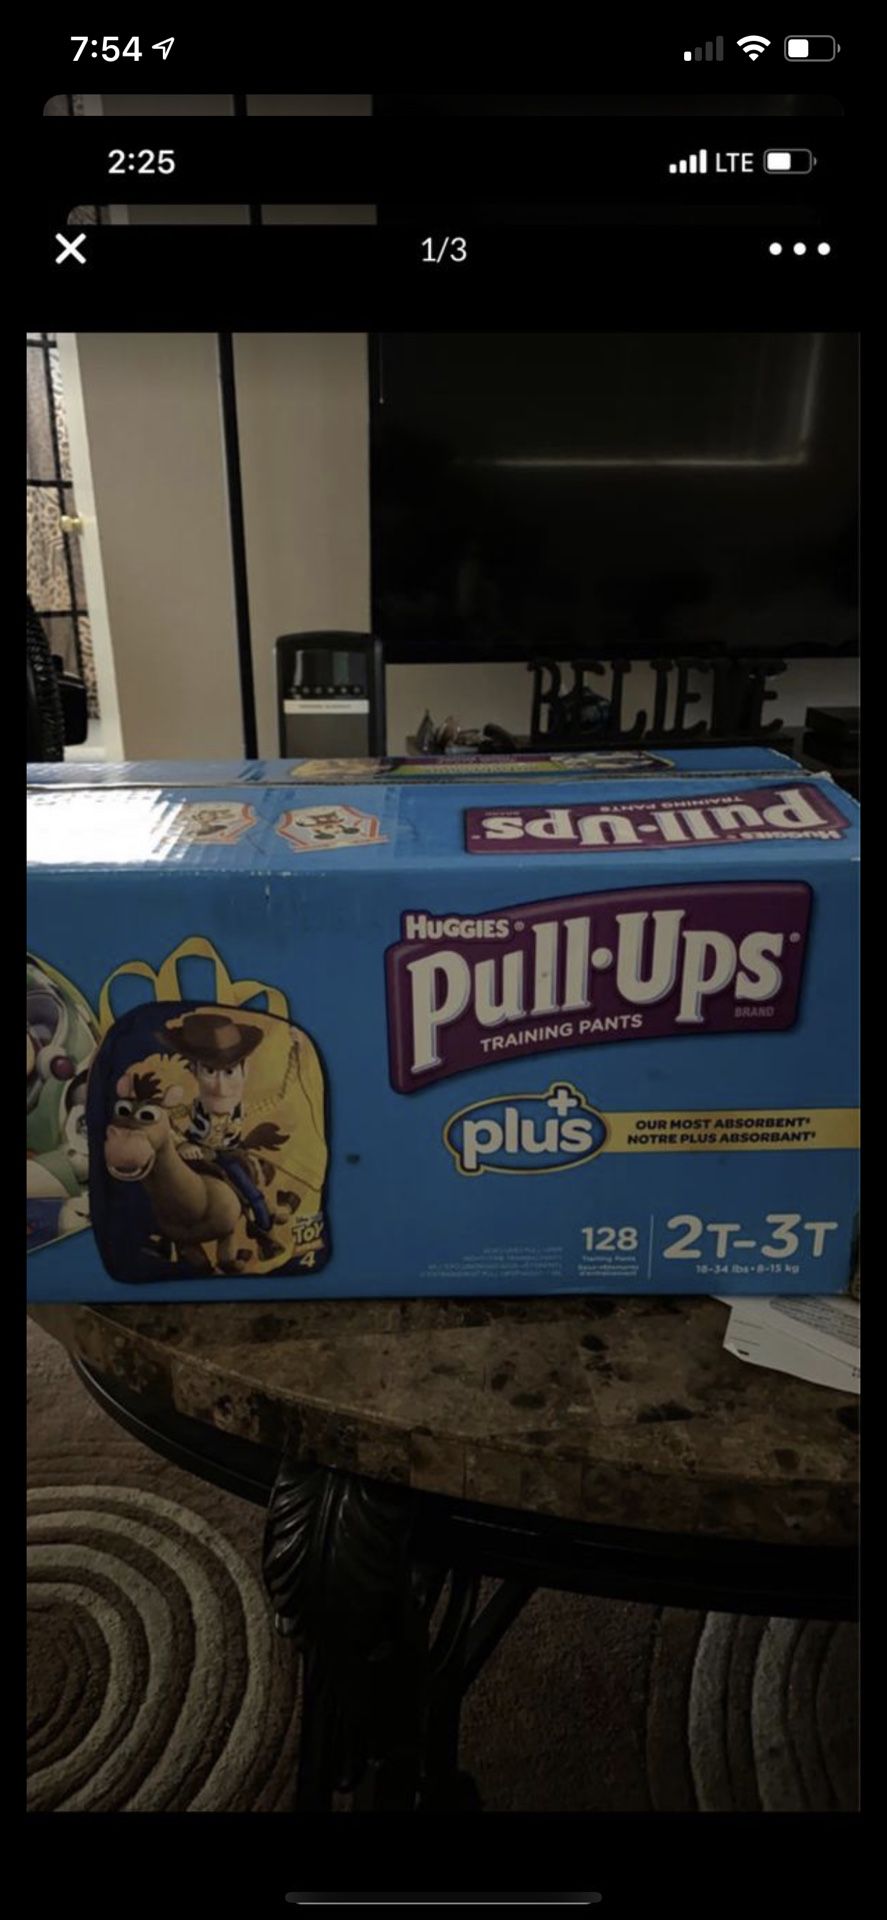 Huggies pull-ups 2t-3t 128 count free buzz backpack $35